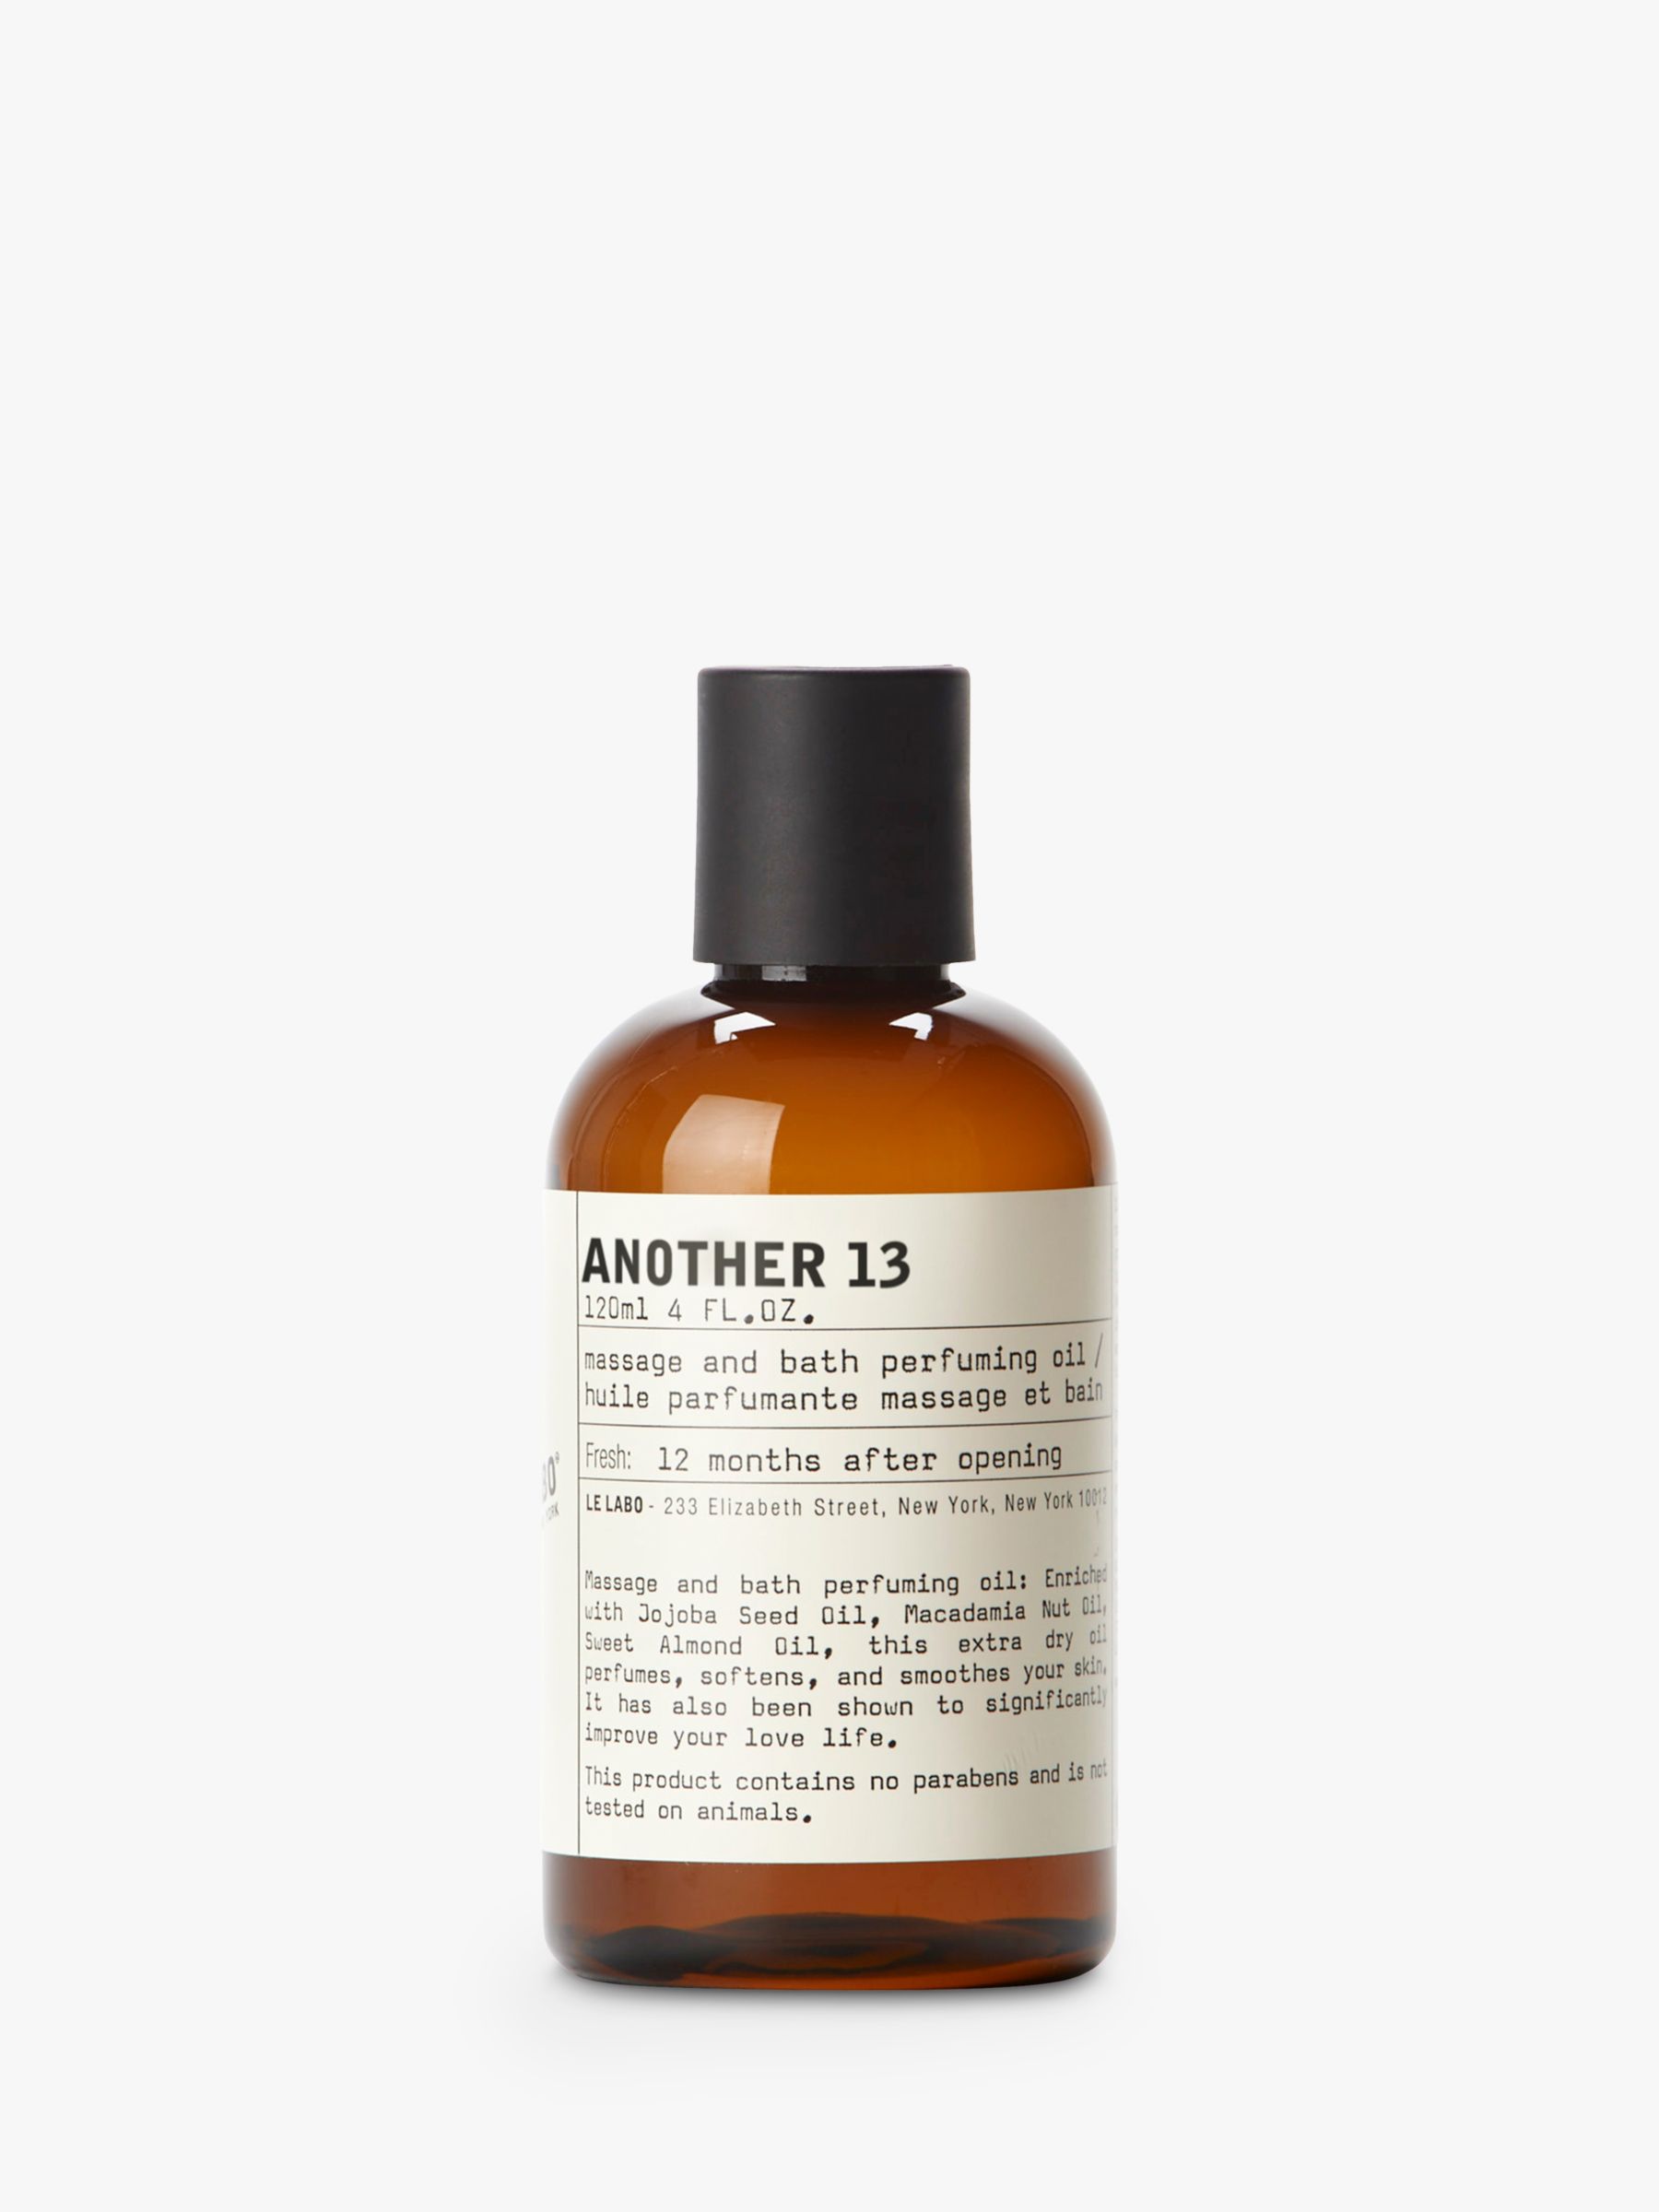 Le Labo Another 13 Massage & Bath Perfuming Oil, 120ml 1